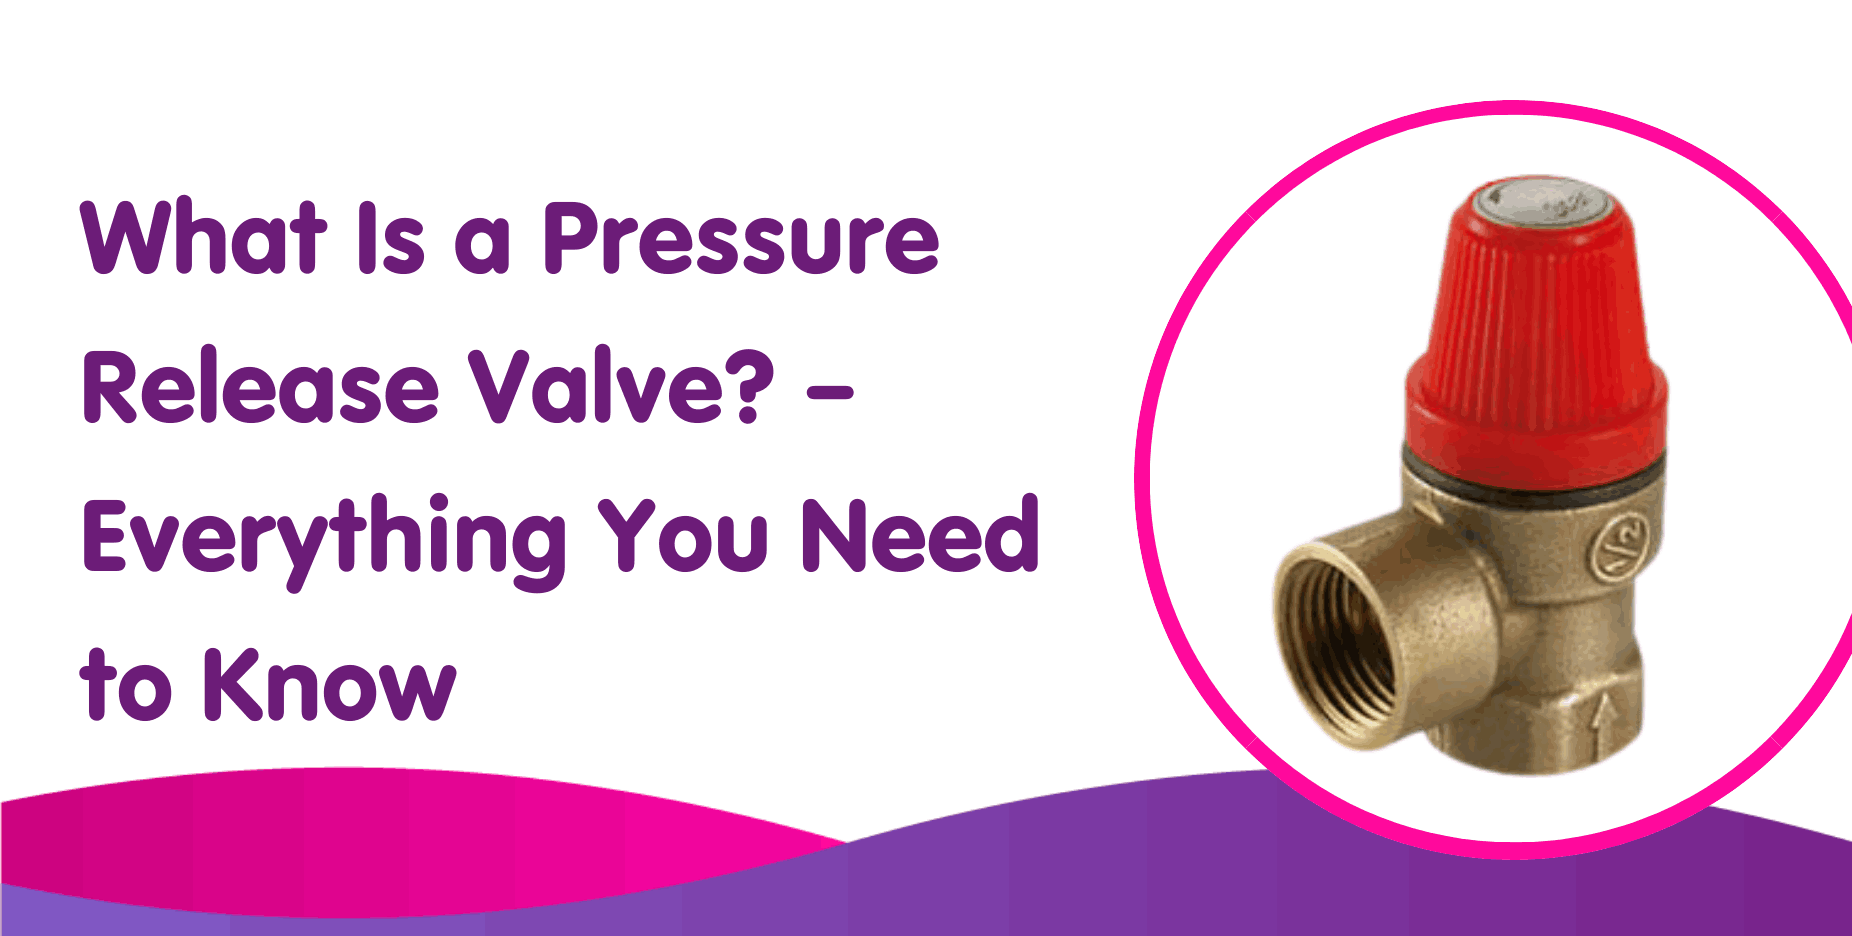 What Is a Pressure Release Valve